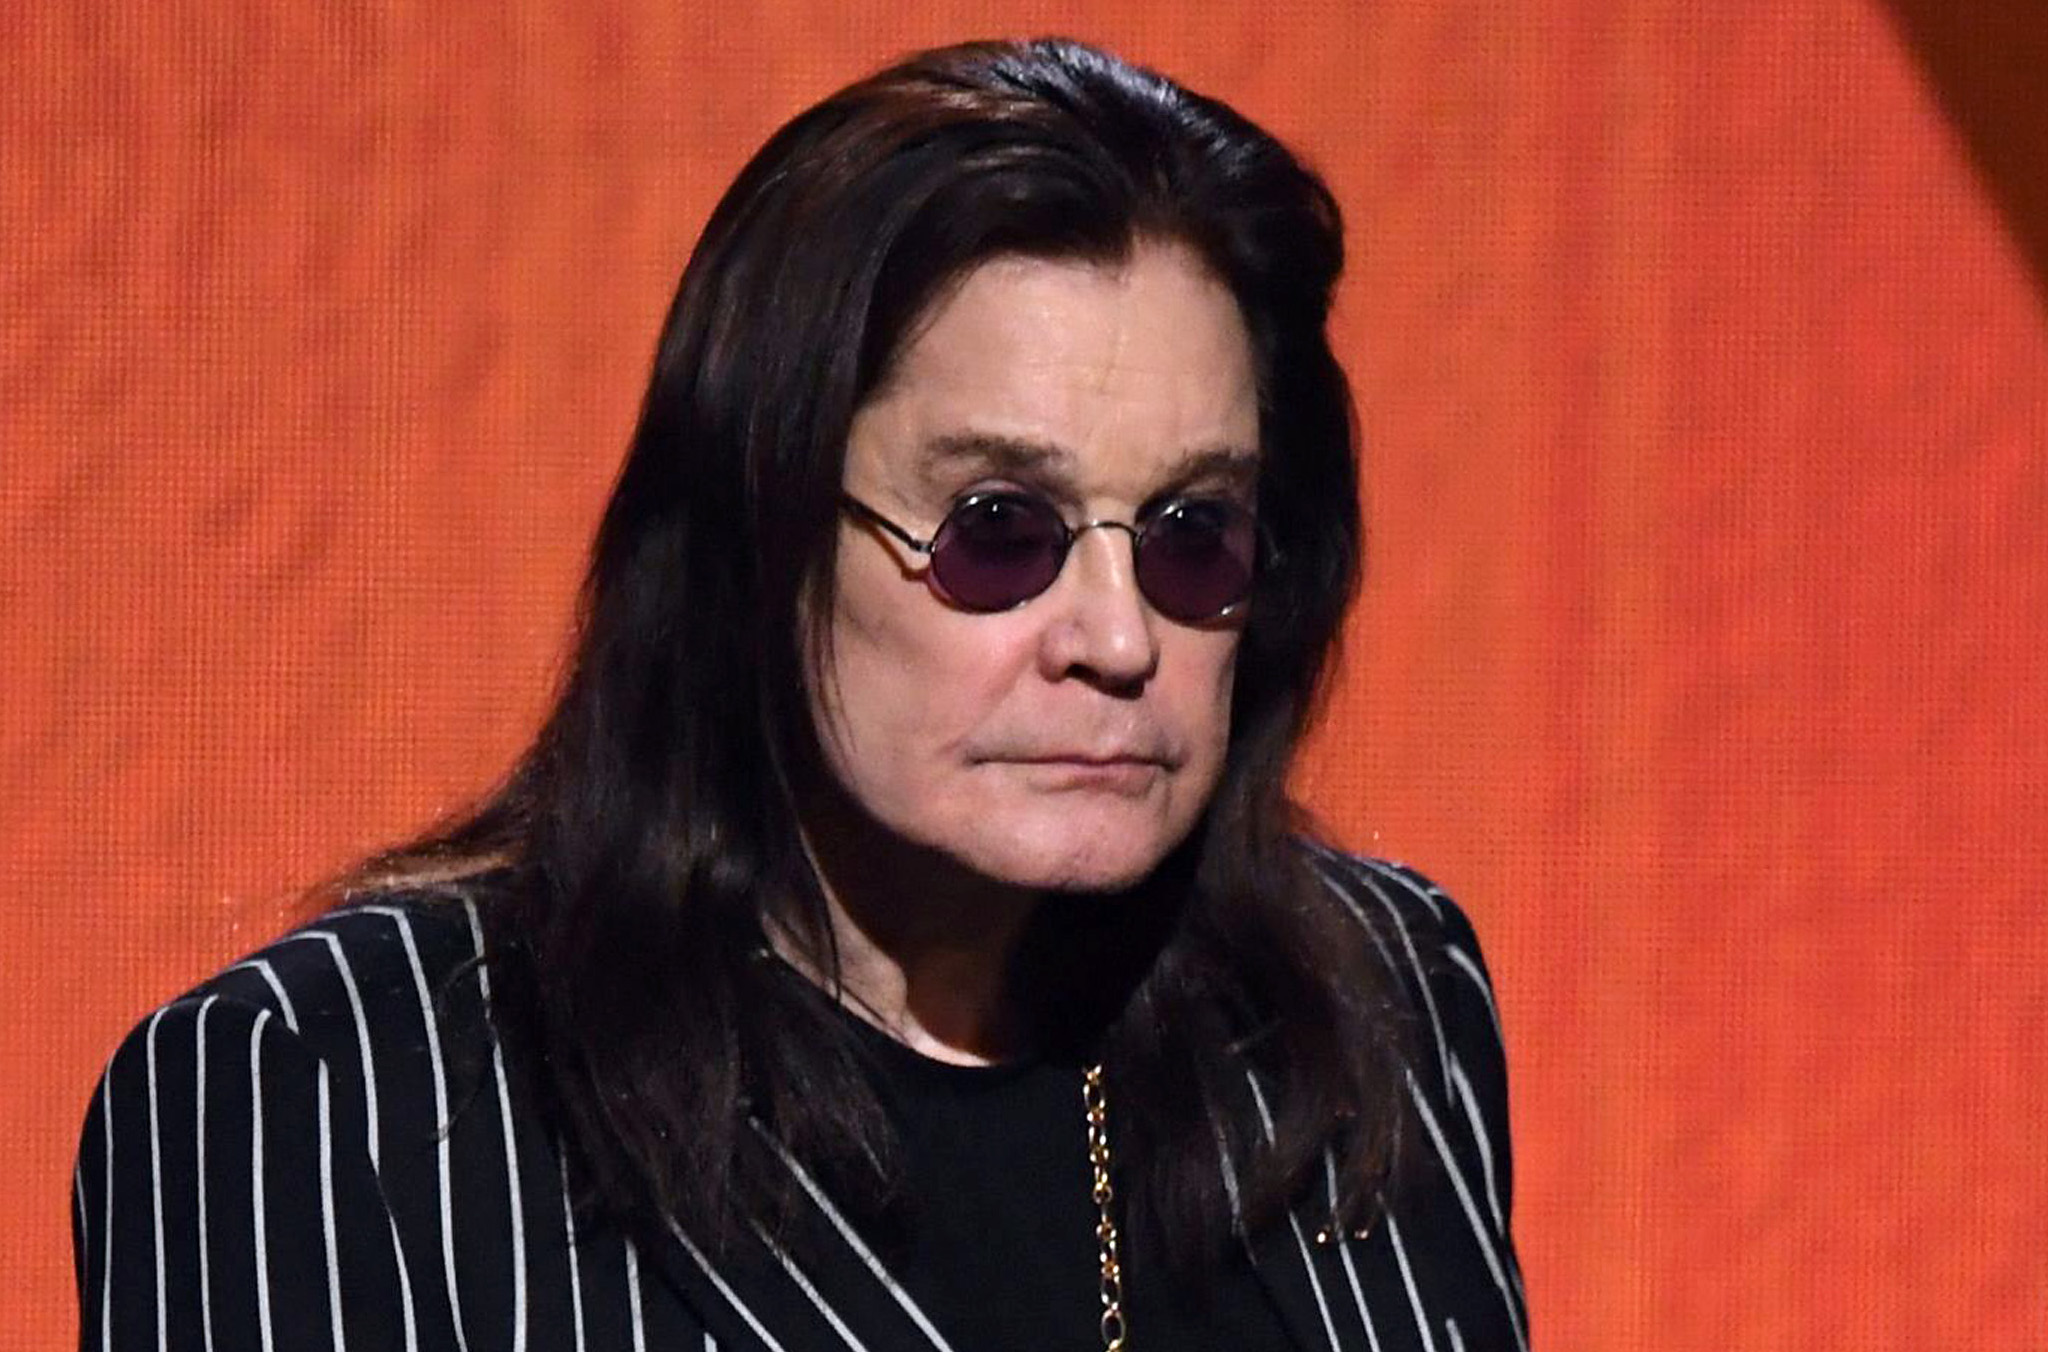 Ozzy Osbourne presenting at the 62nd Annual Grammy Awards